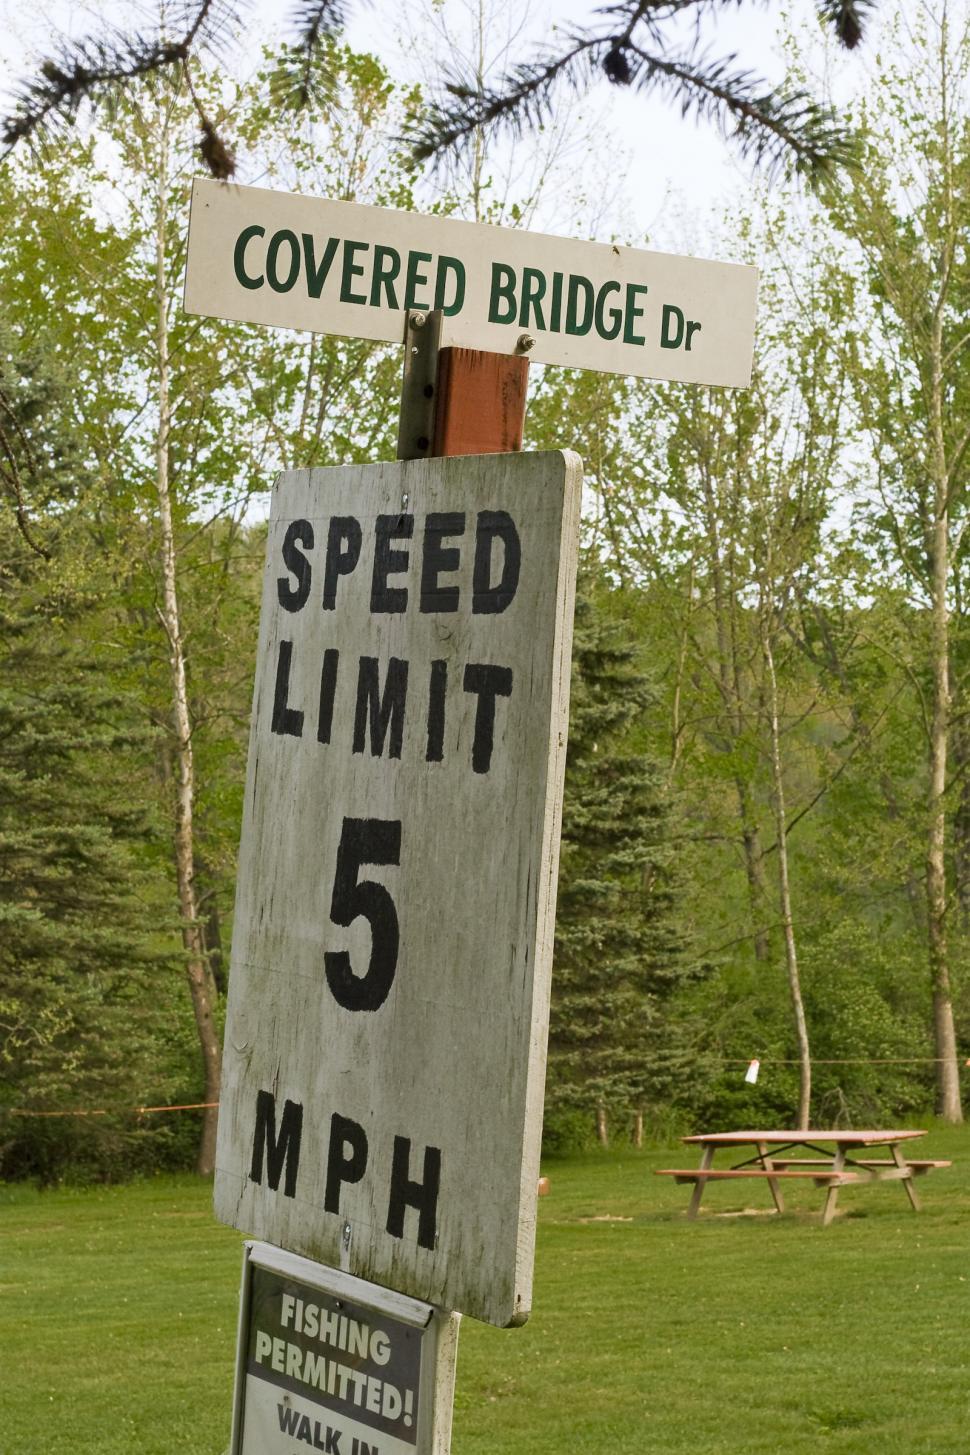 Free Image of Covered Bridge Dr. and Speed limit sign 